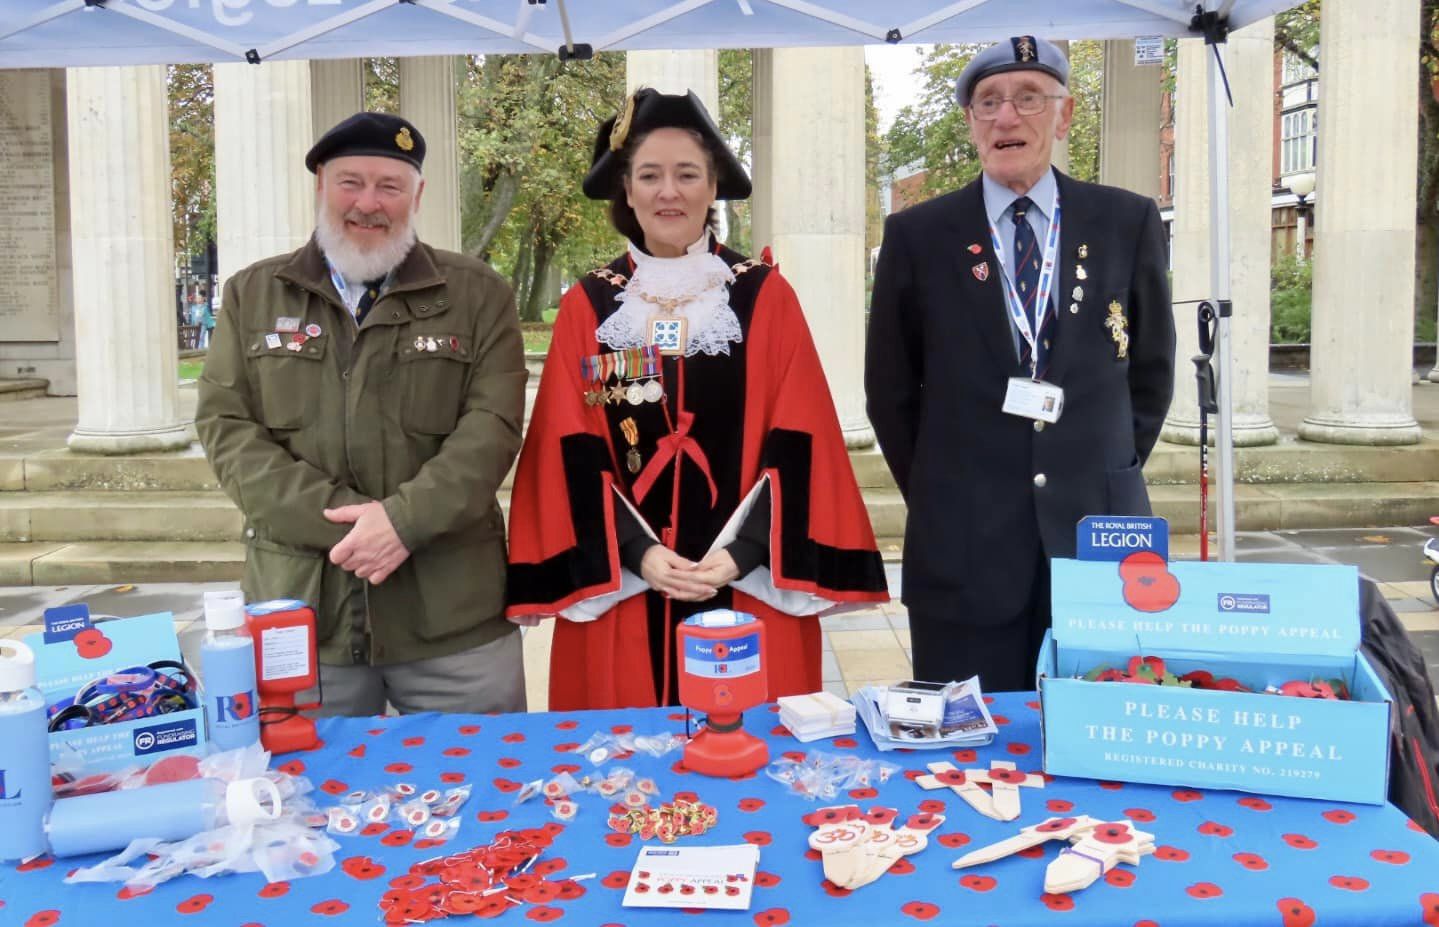 The Southport Royal British Legion Poppy Appeal has taken place in Southport. Mayor of Sefton Cllr Clare Carragher (centre) with local veterans Russ Swinburne (left) and Dave Walmsley (right) 